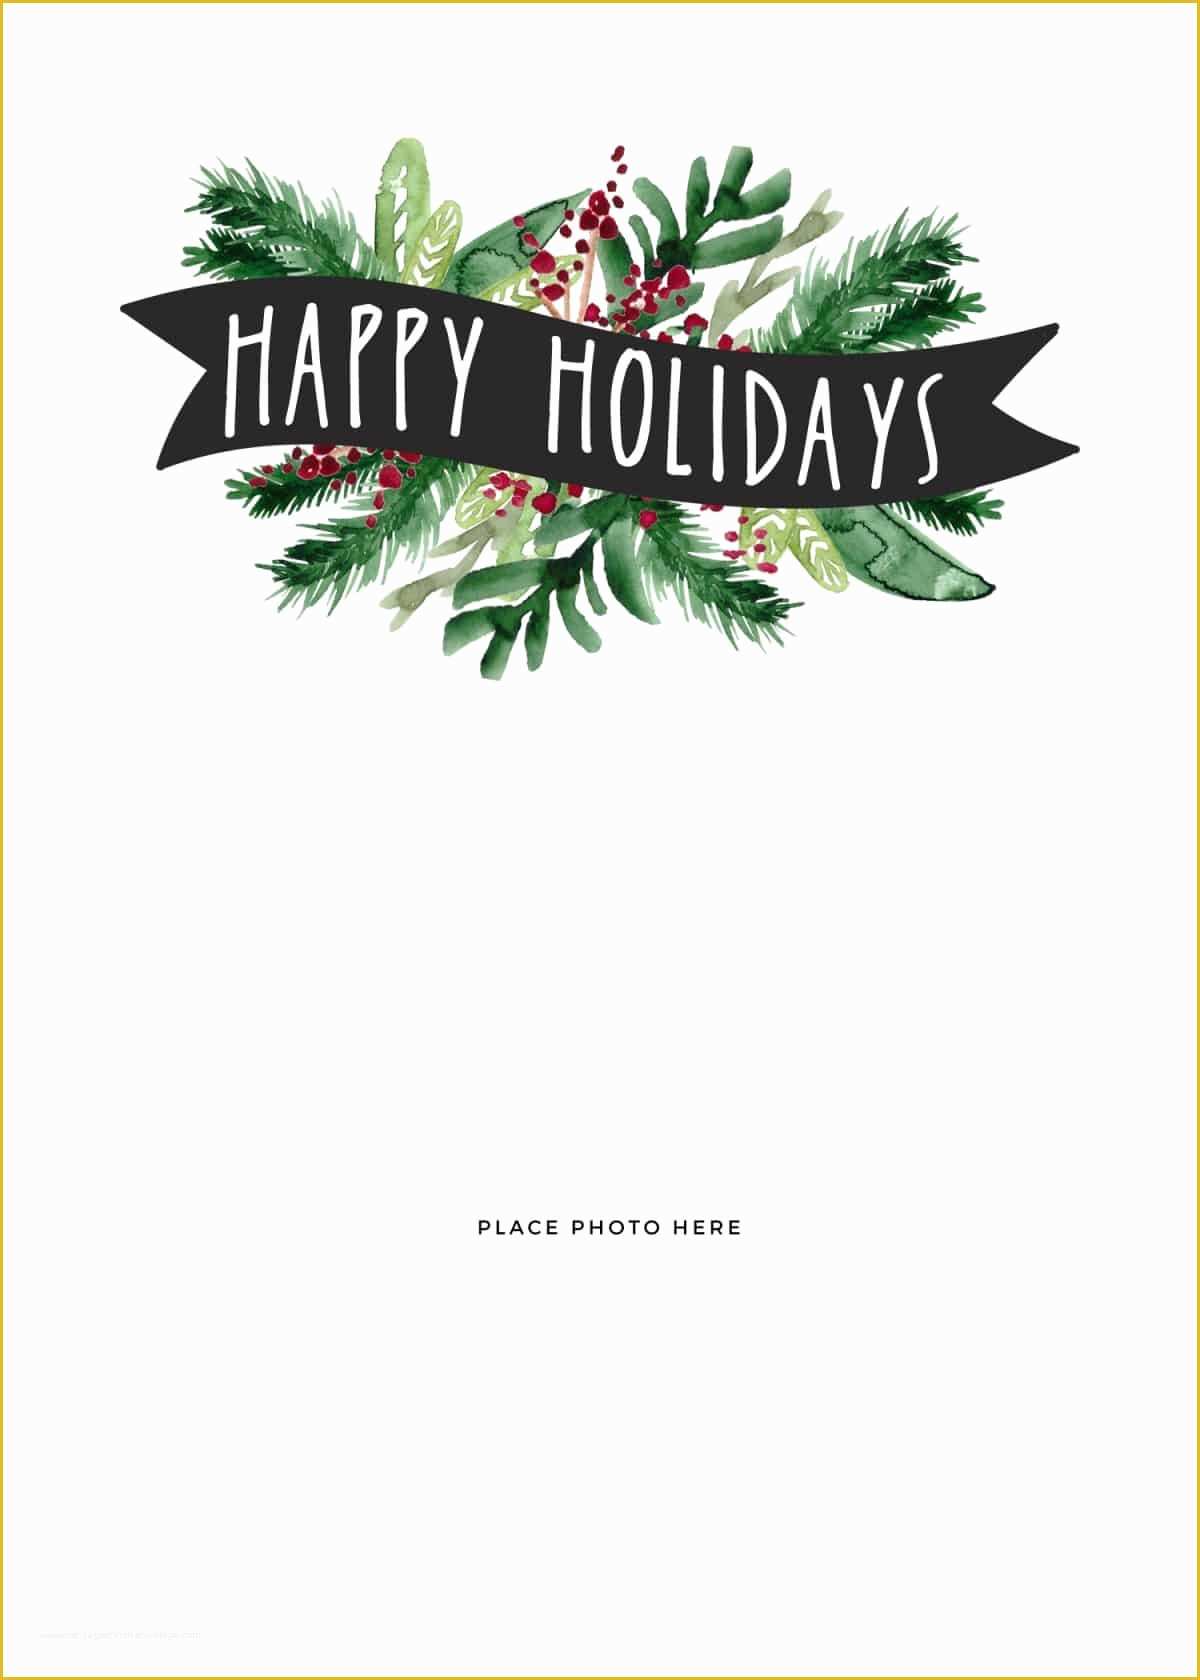 Christmas Card Print Templates Free Of Make Your Own Christmas Cards for Free somewhat